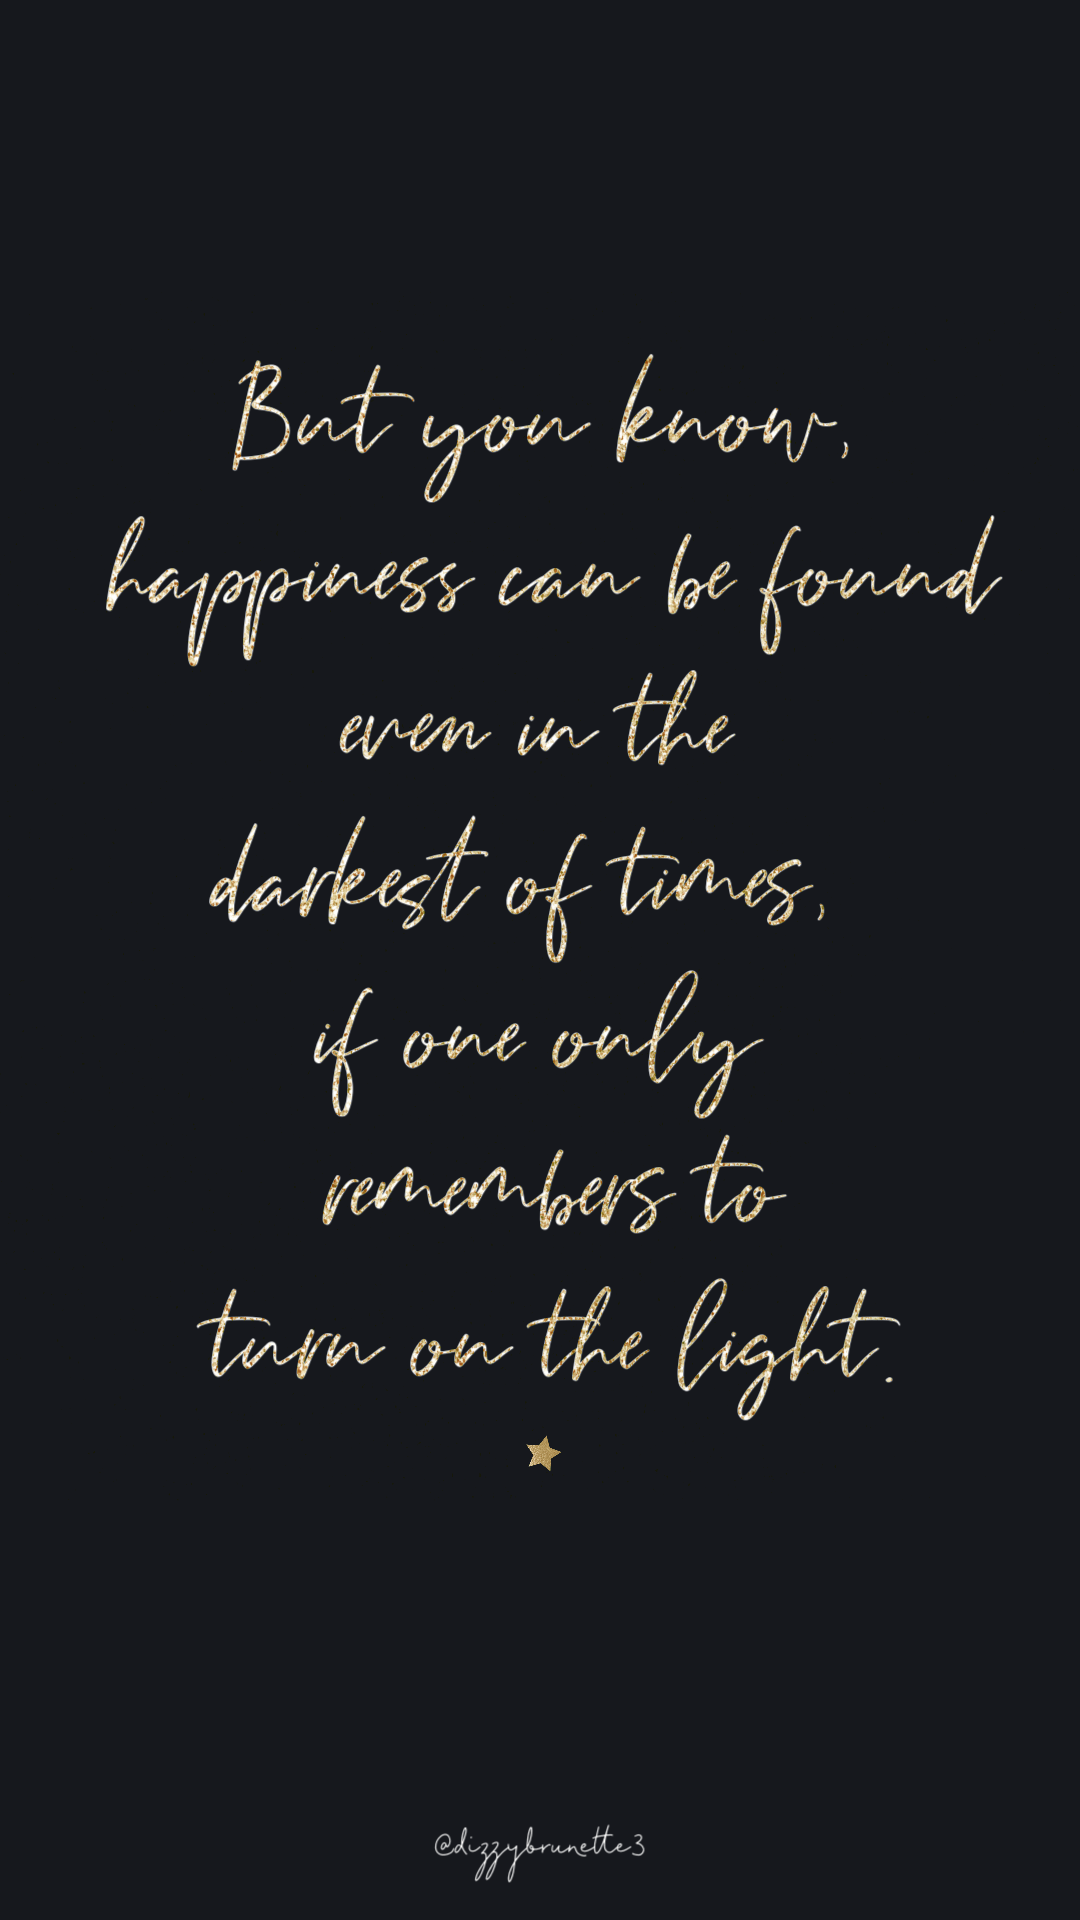 Harry Potter Quotes Iphone Wallpapers